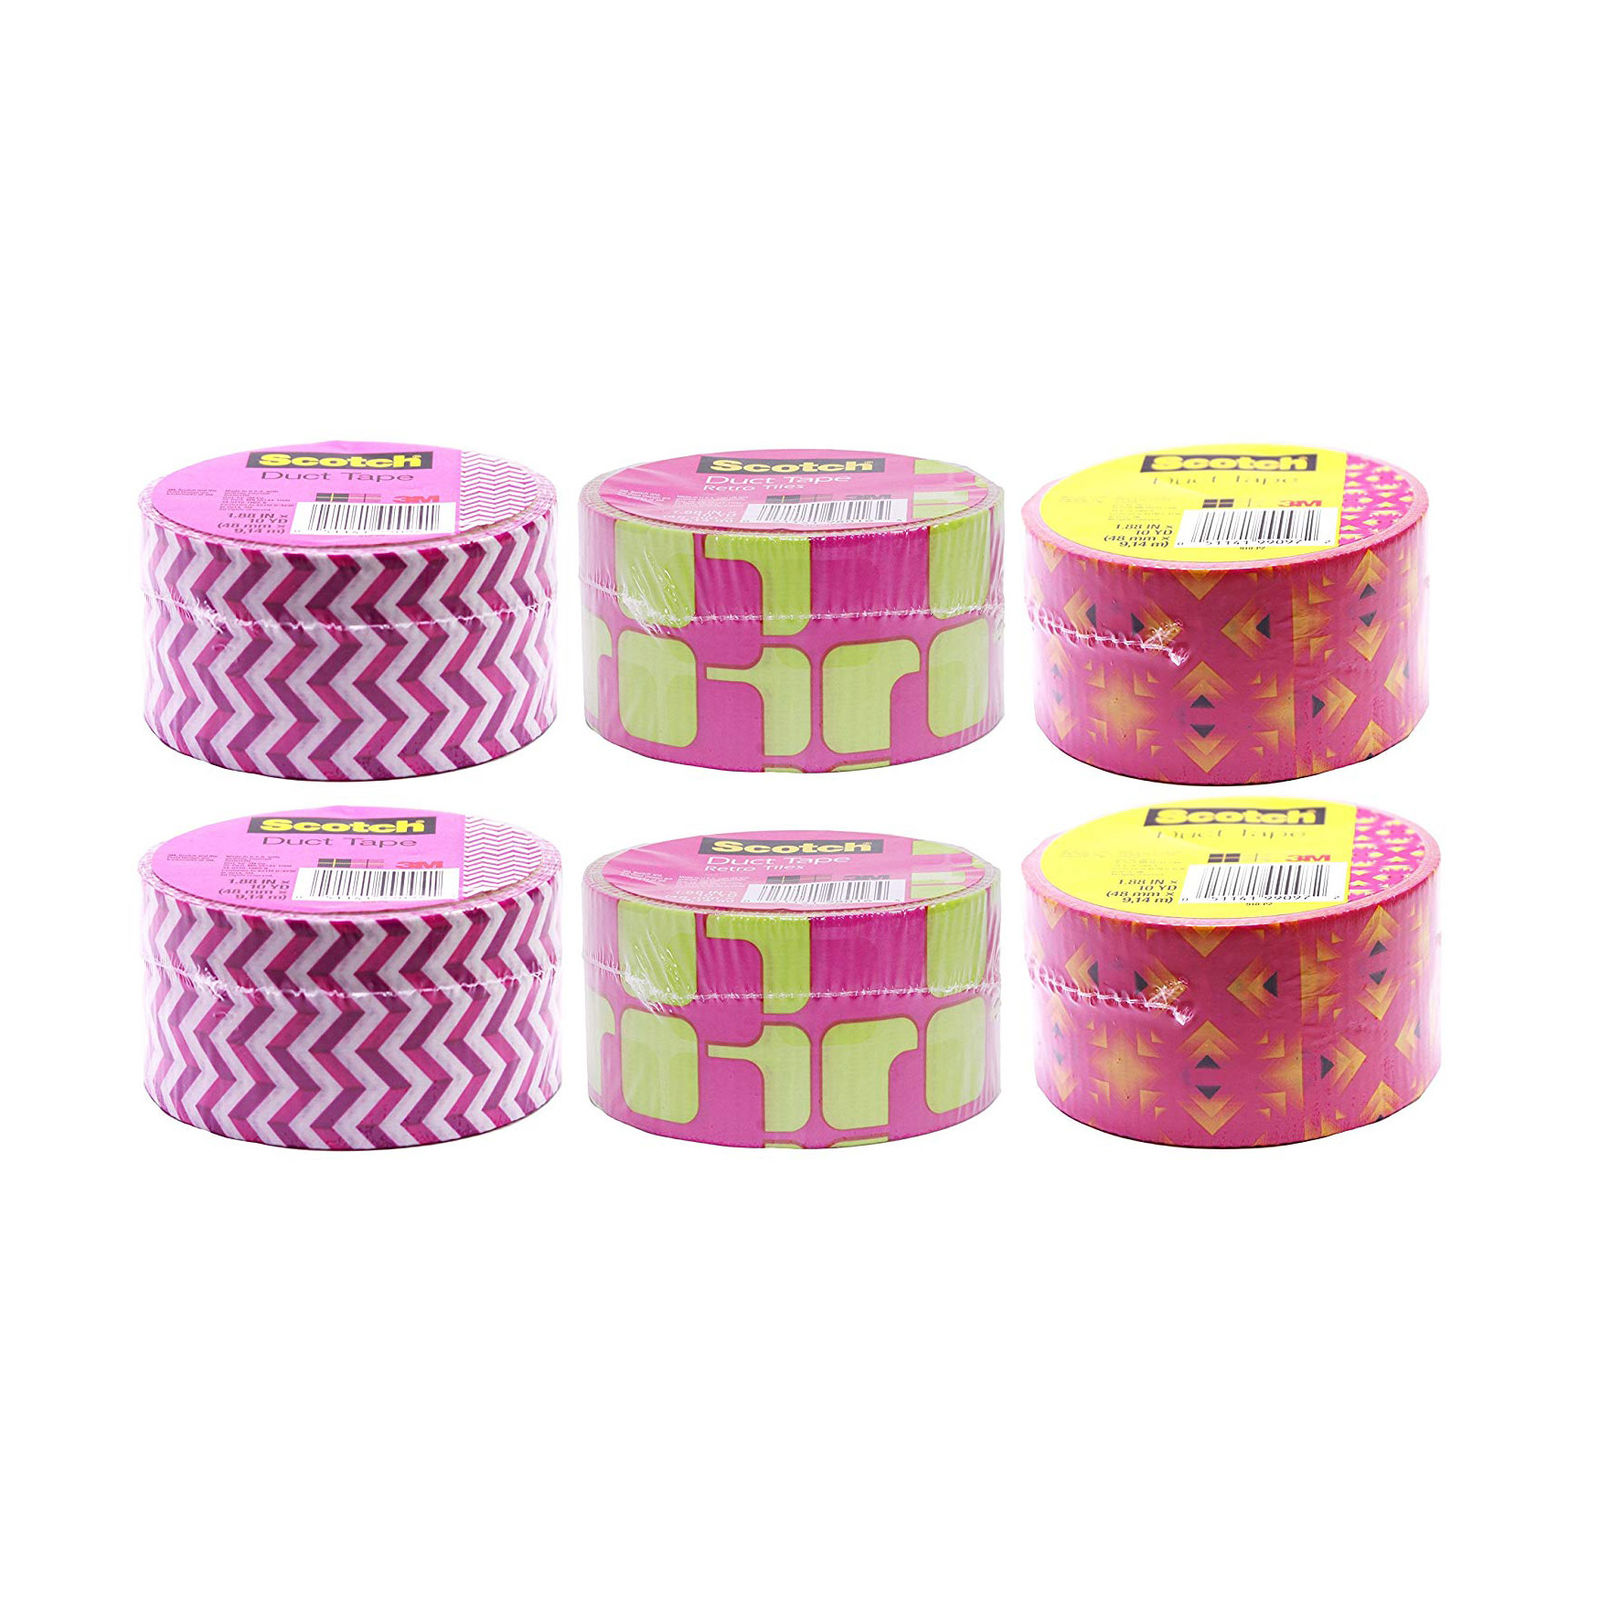 Scotch Duct Tape, Assorted Patterns, 2 of each (6 Pack)